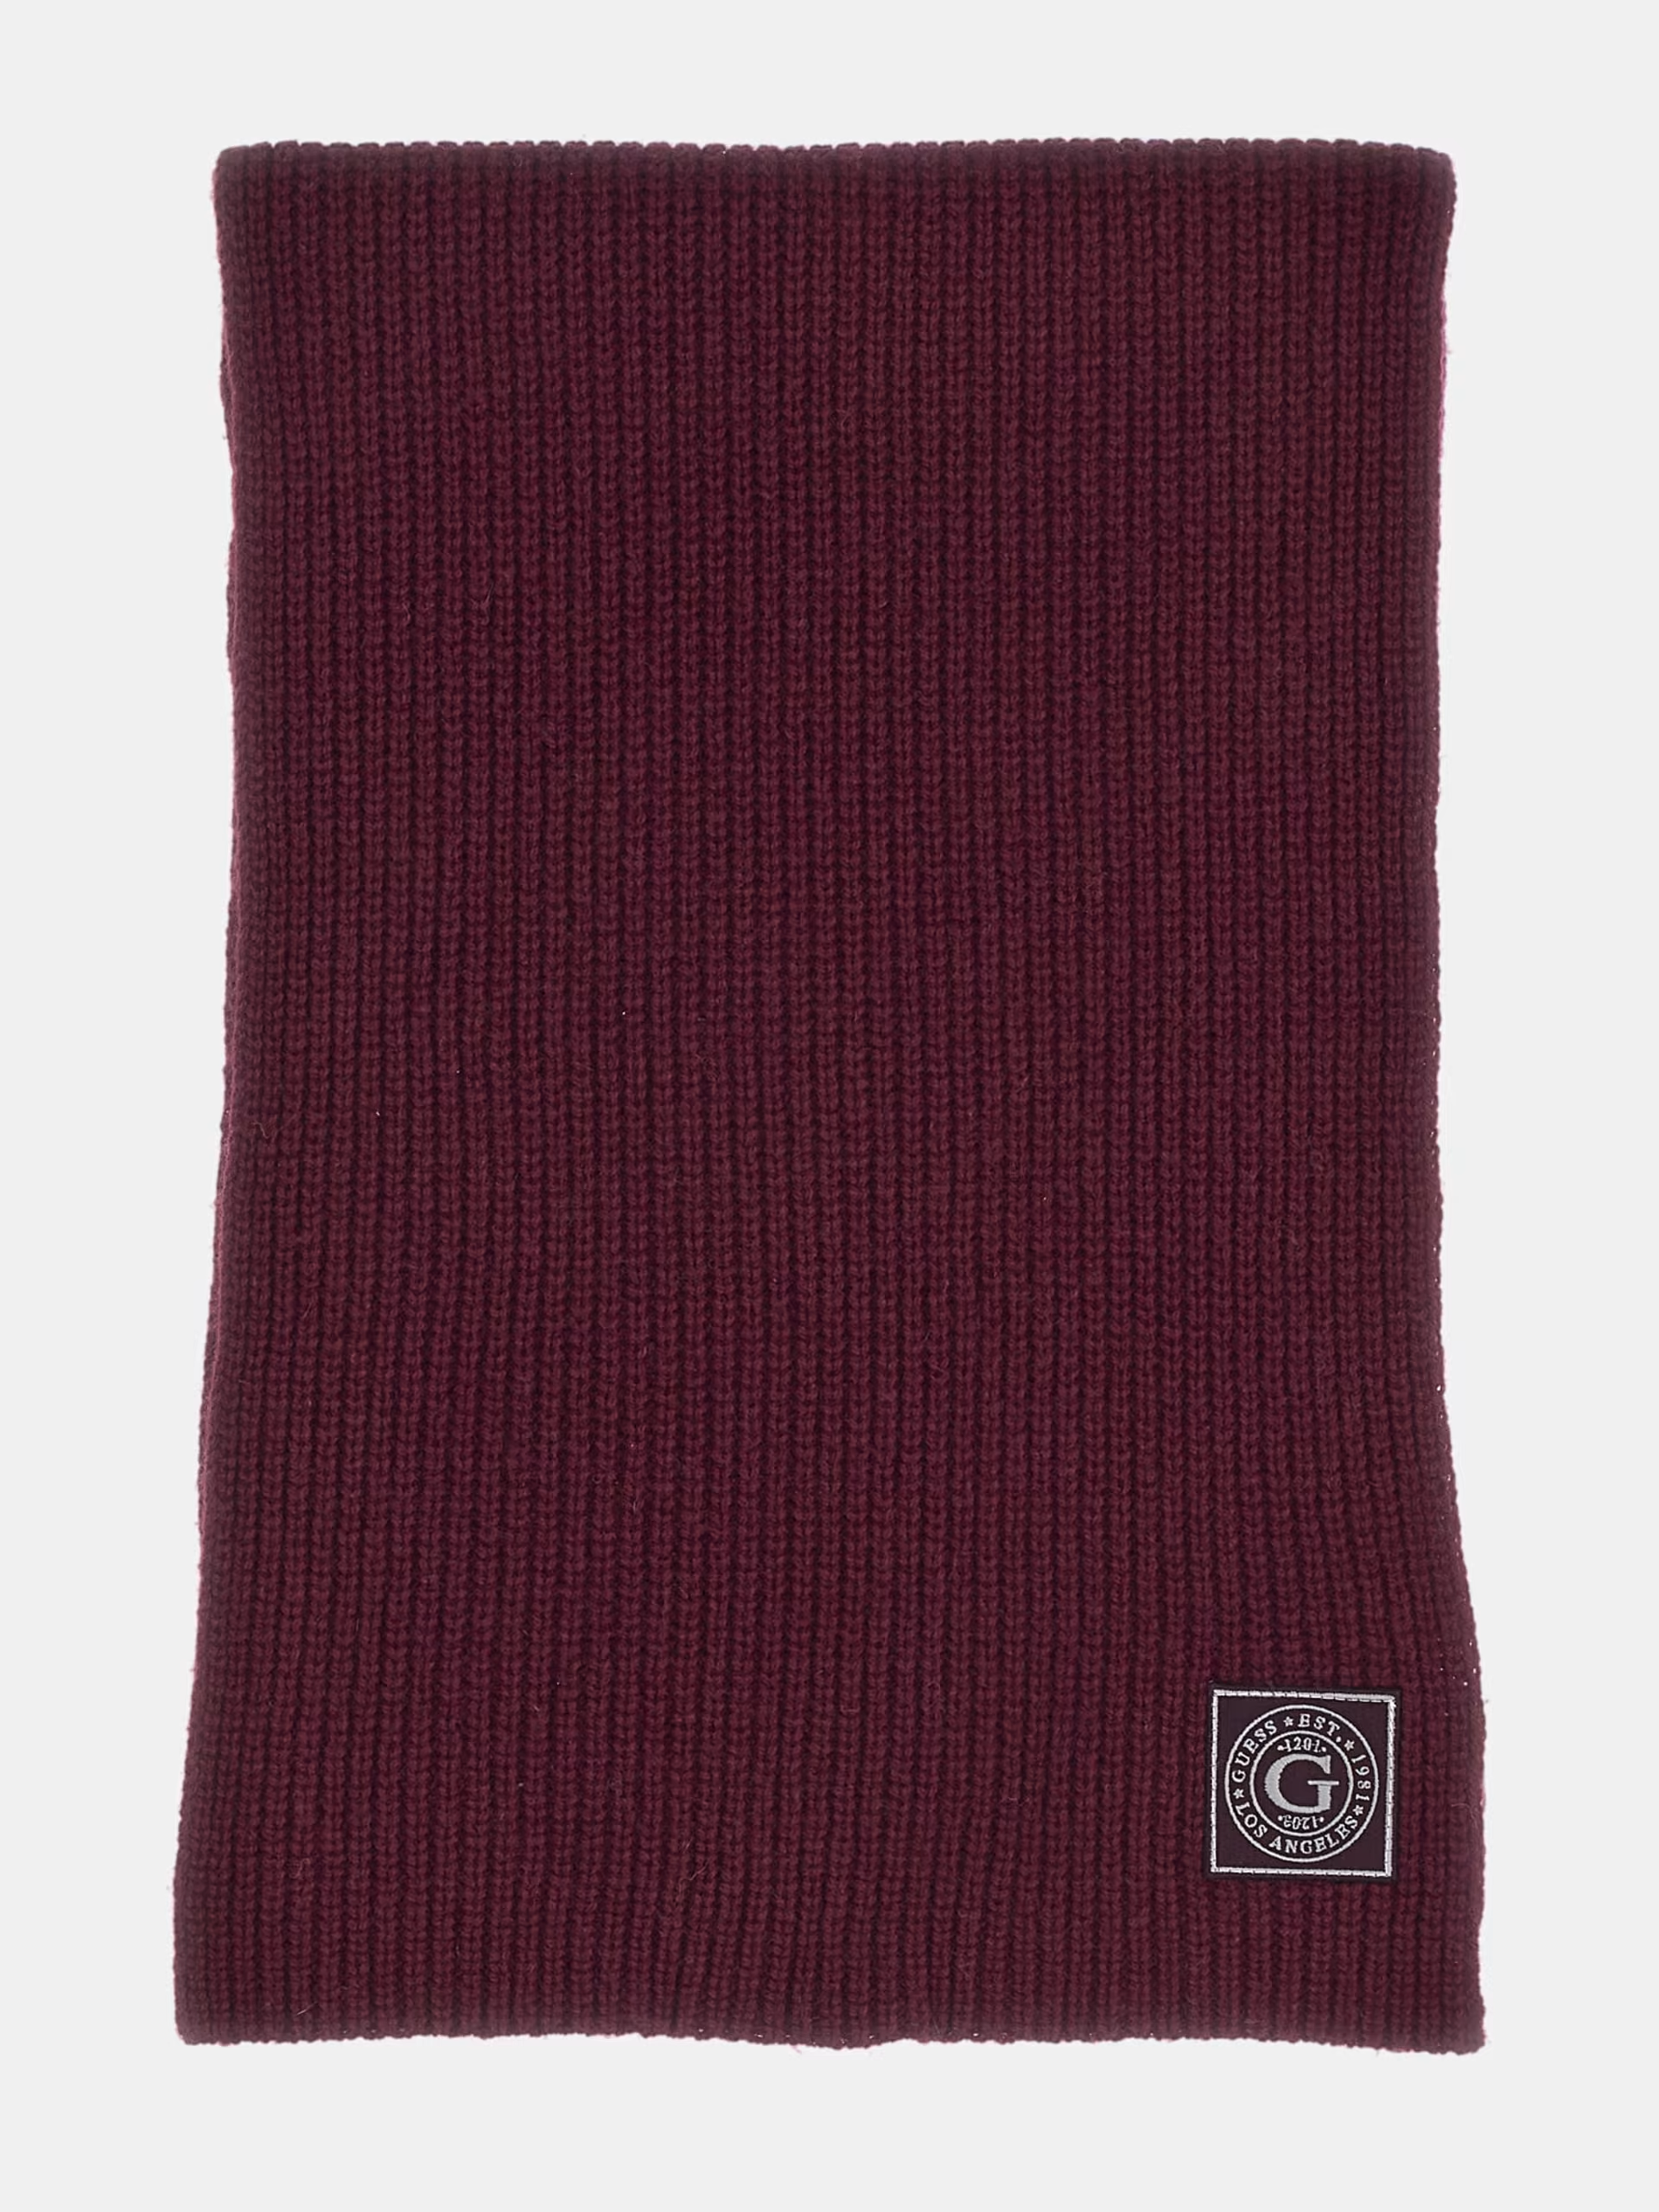 Guess ribbed scarfs and beanies